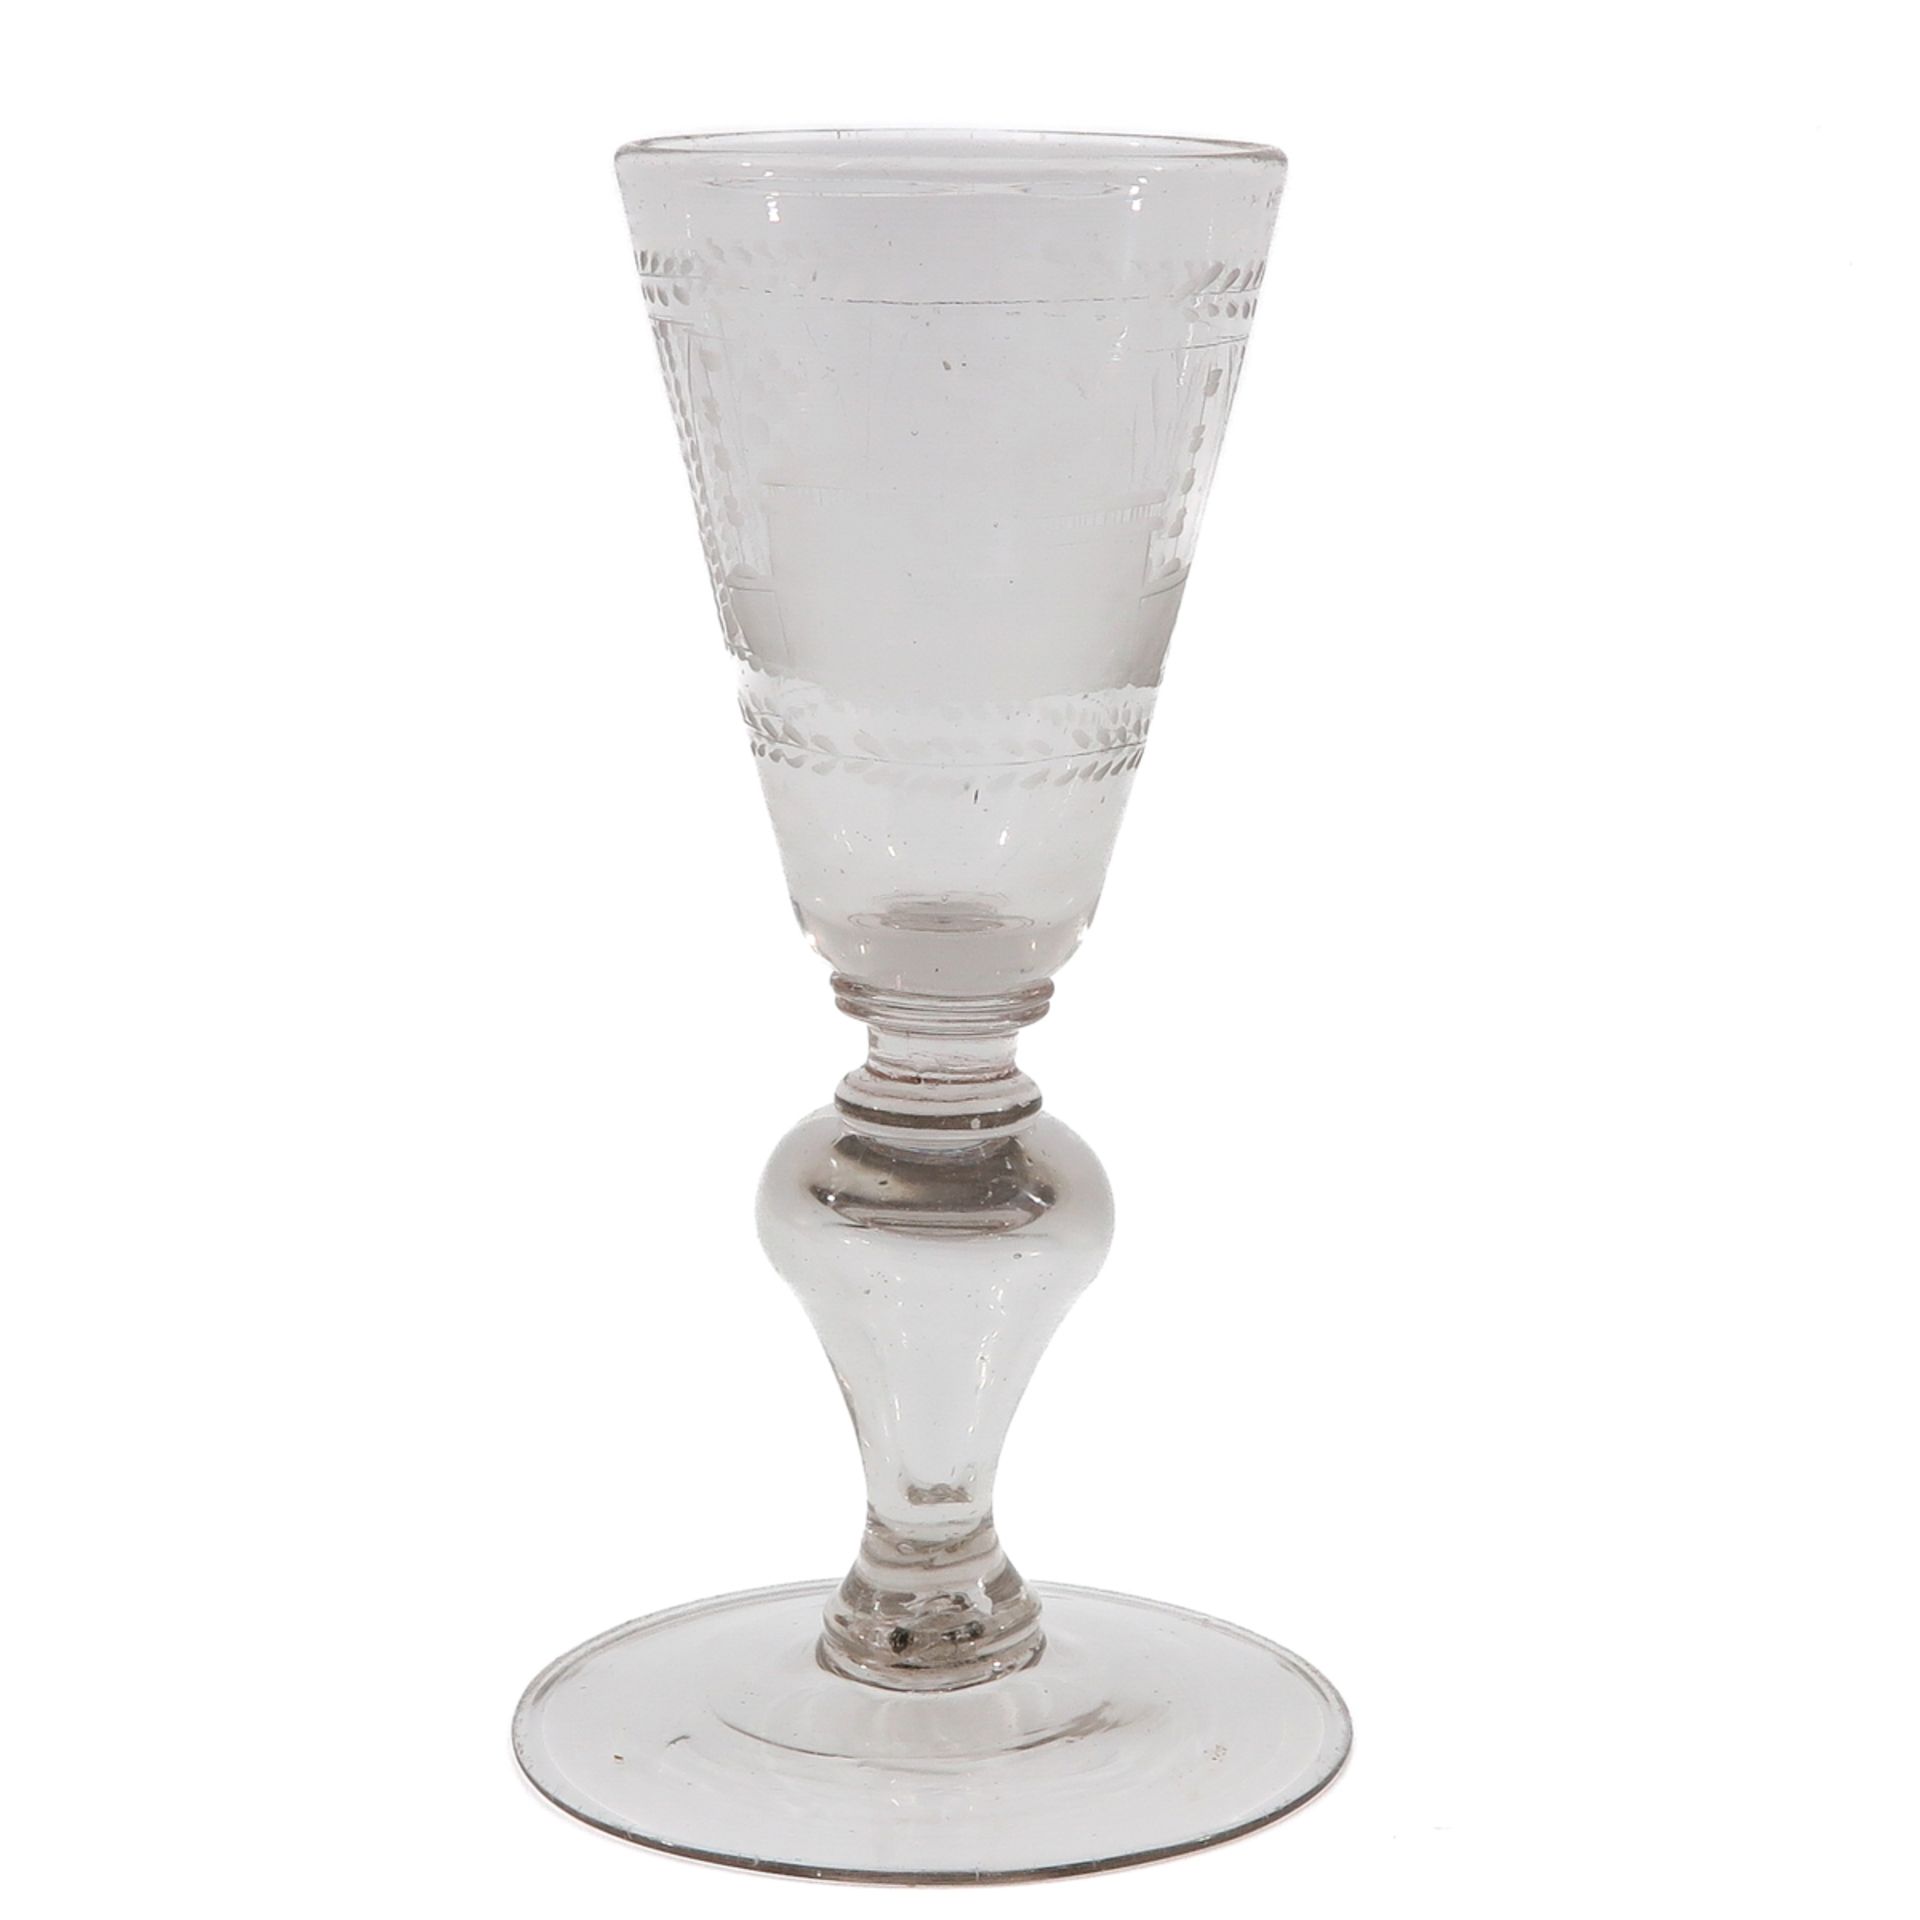 An 18th Century Engraved Glass